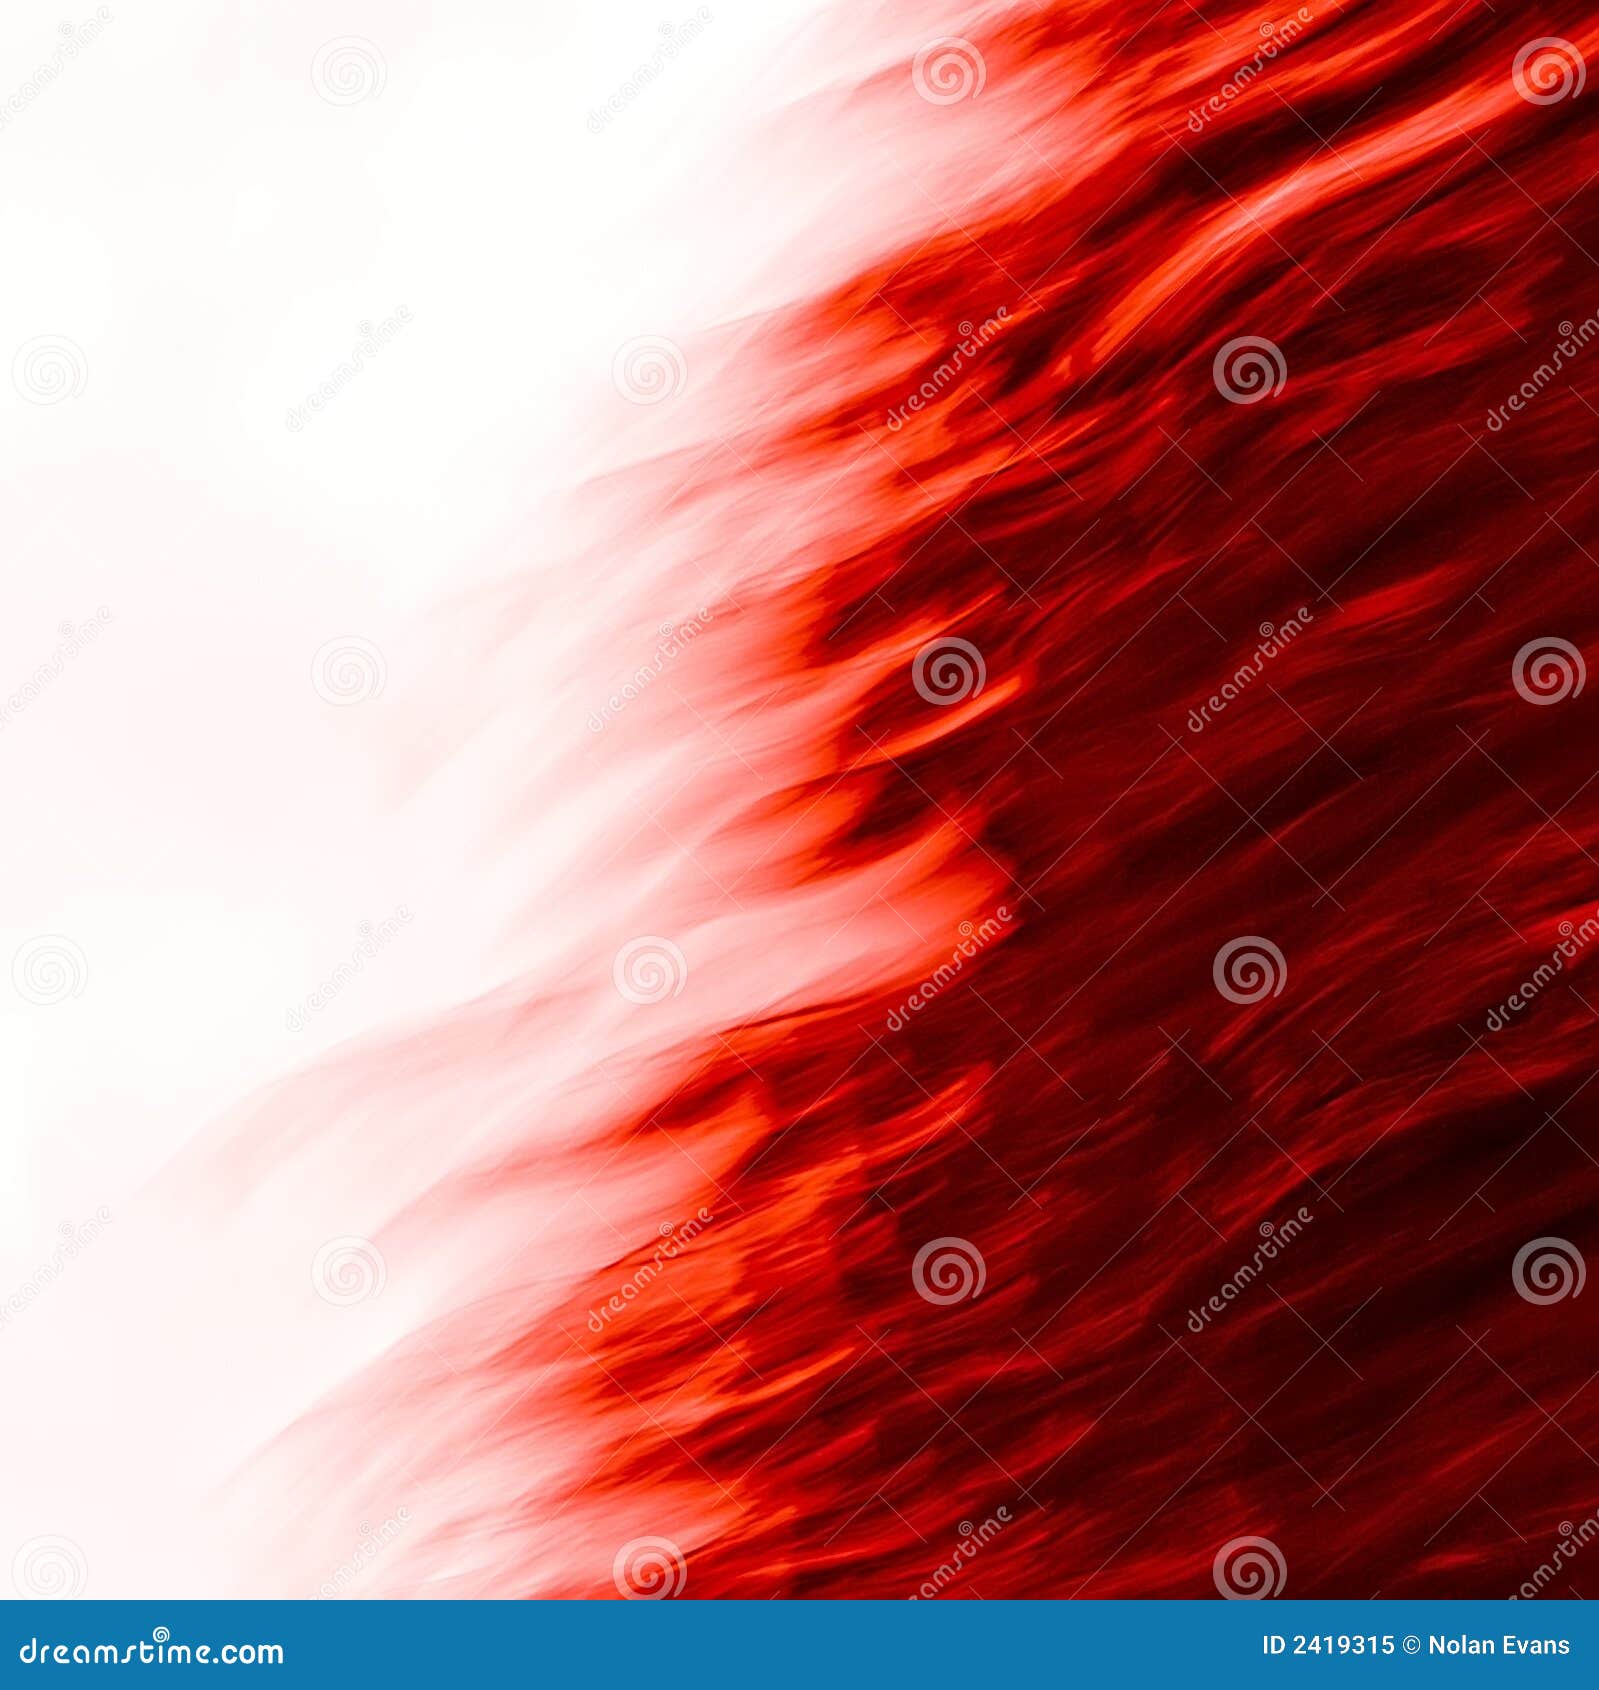 Red Blast #2 stock image. Image of abstraction, explode - 2419315